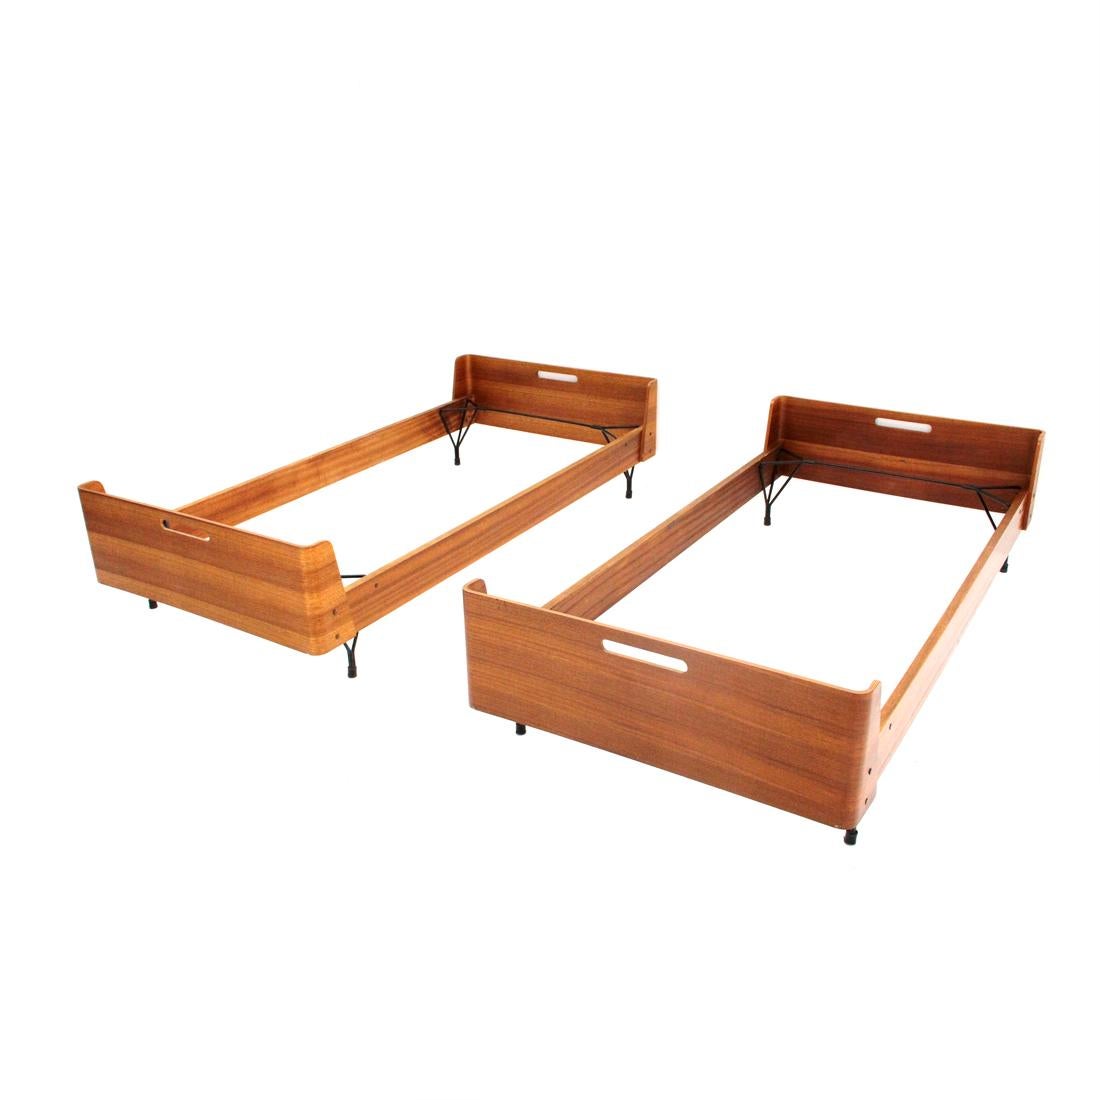 Pair of beds produced in the 1950s by Rima and designed by Gastone Rinaldi.
Teak multi-layer structure with curved corners.
Handle on headboard and footboard.
Two bases in black painted metal.
Good general condition, some signs and lack of